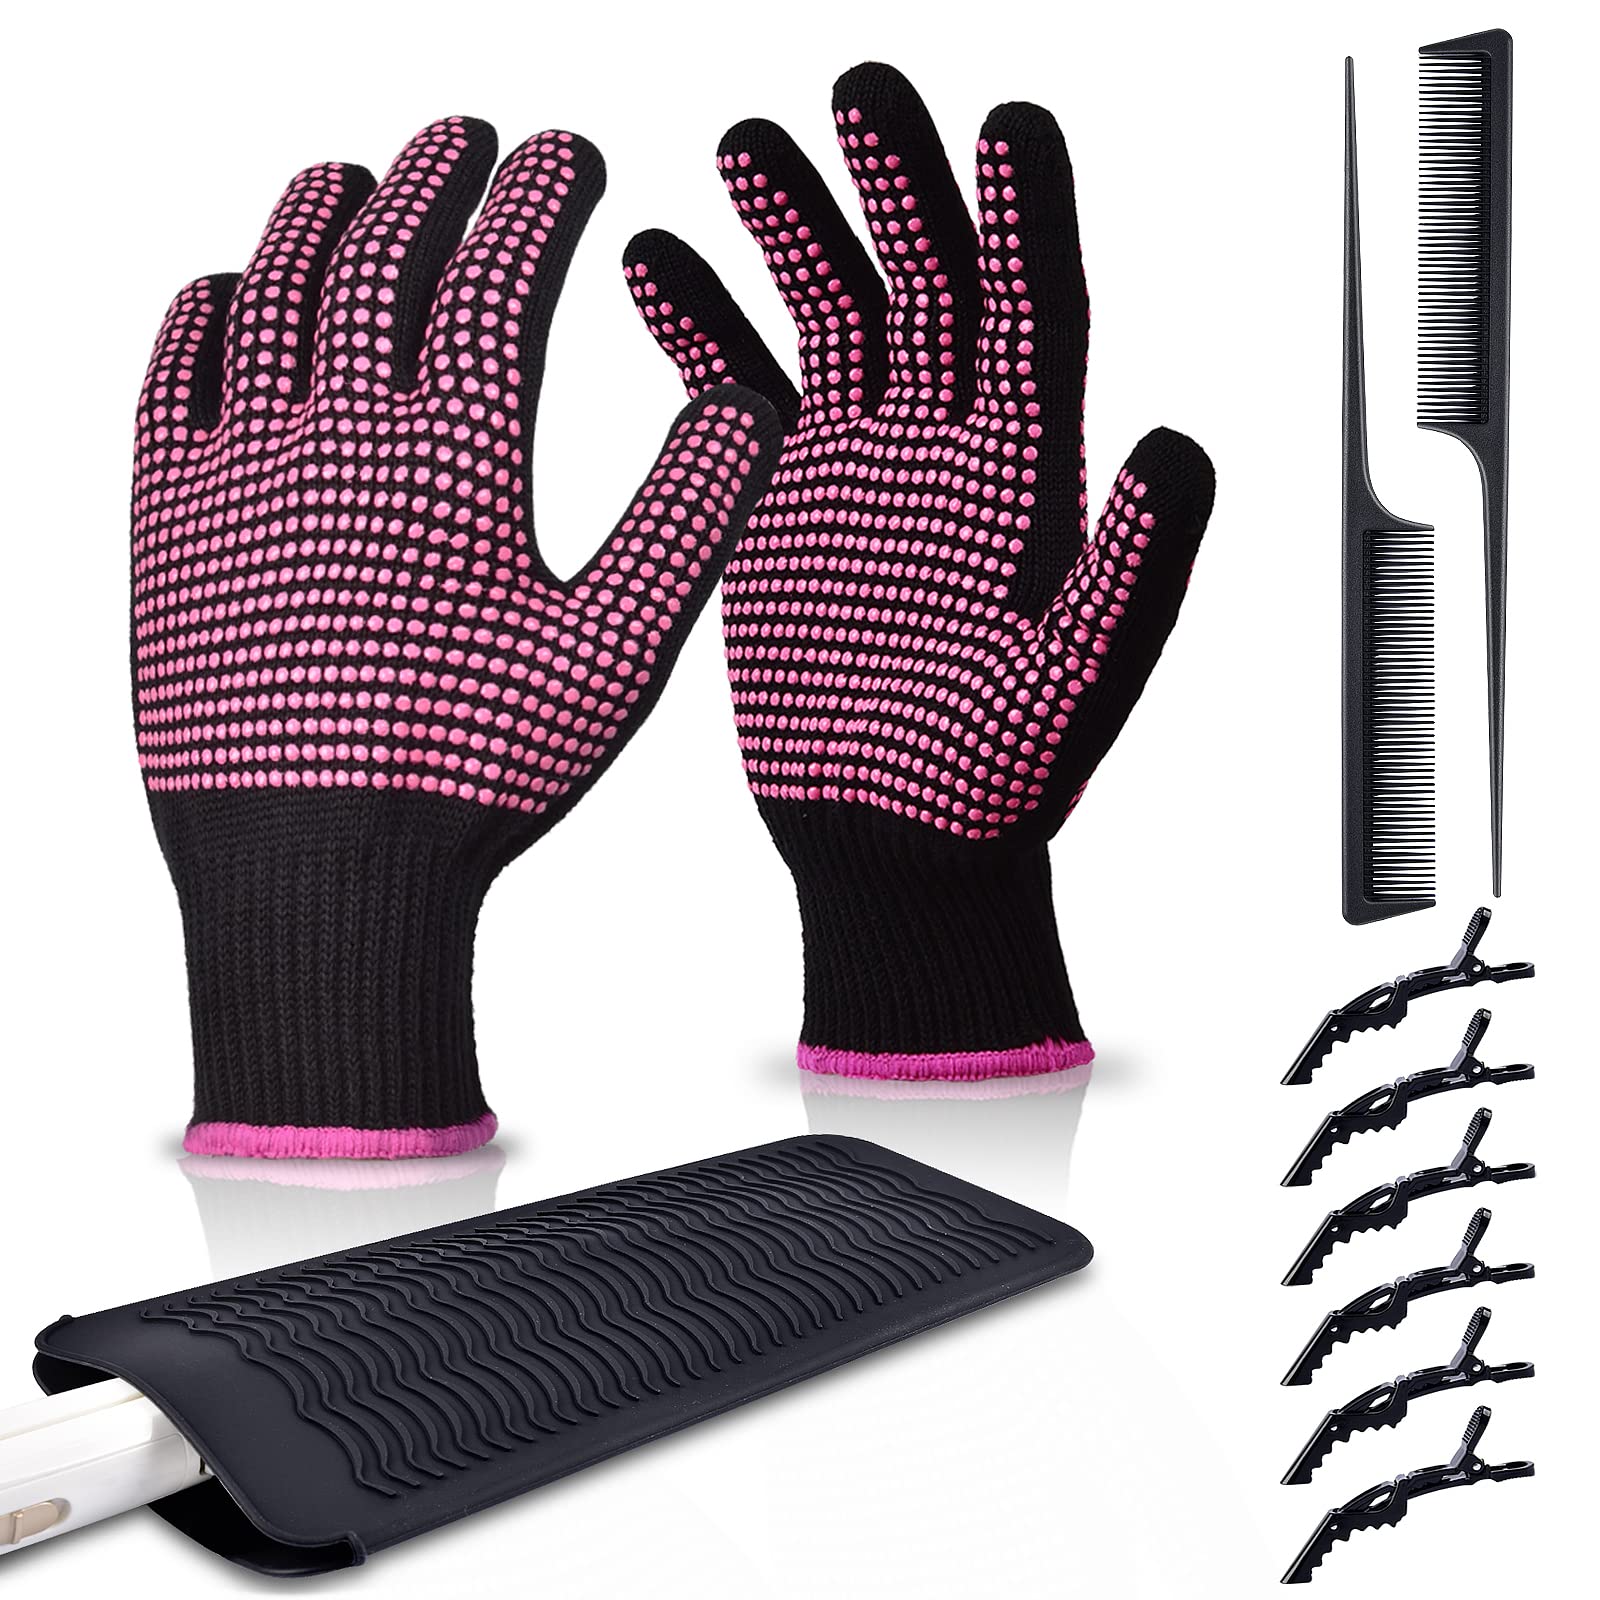 Heat Resistant Gloves for Hair Styling, ARRITZ Professional Curling Wand  Gloves with Silicone Bumps Heat Proof